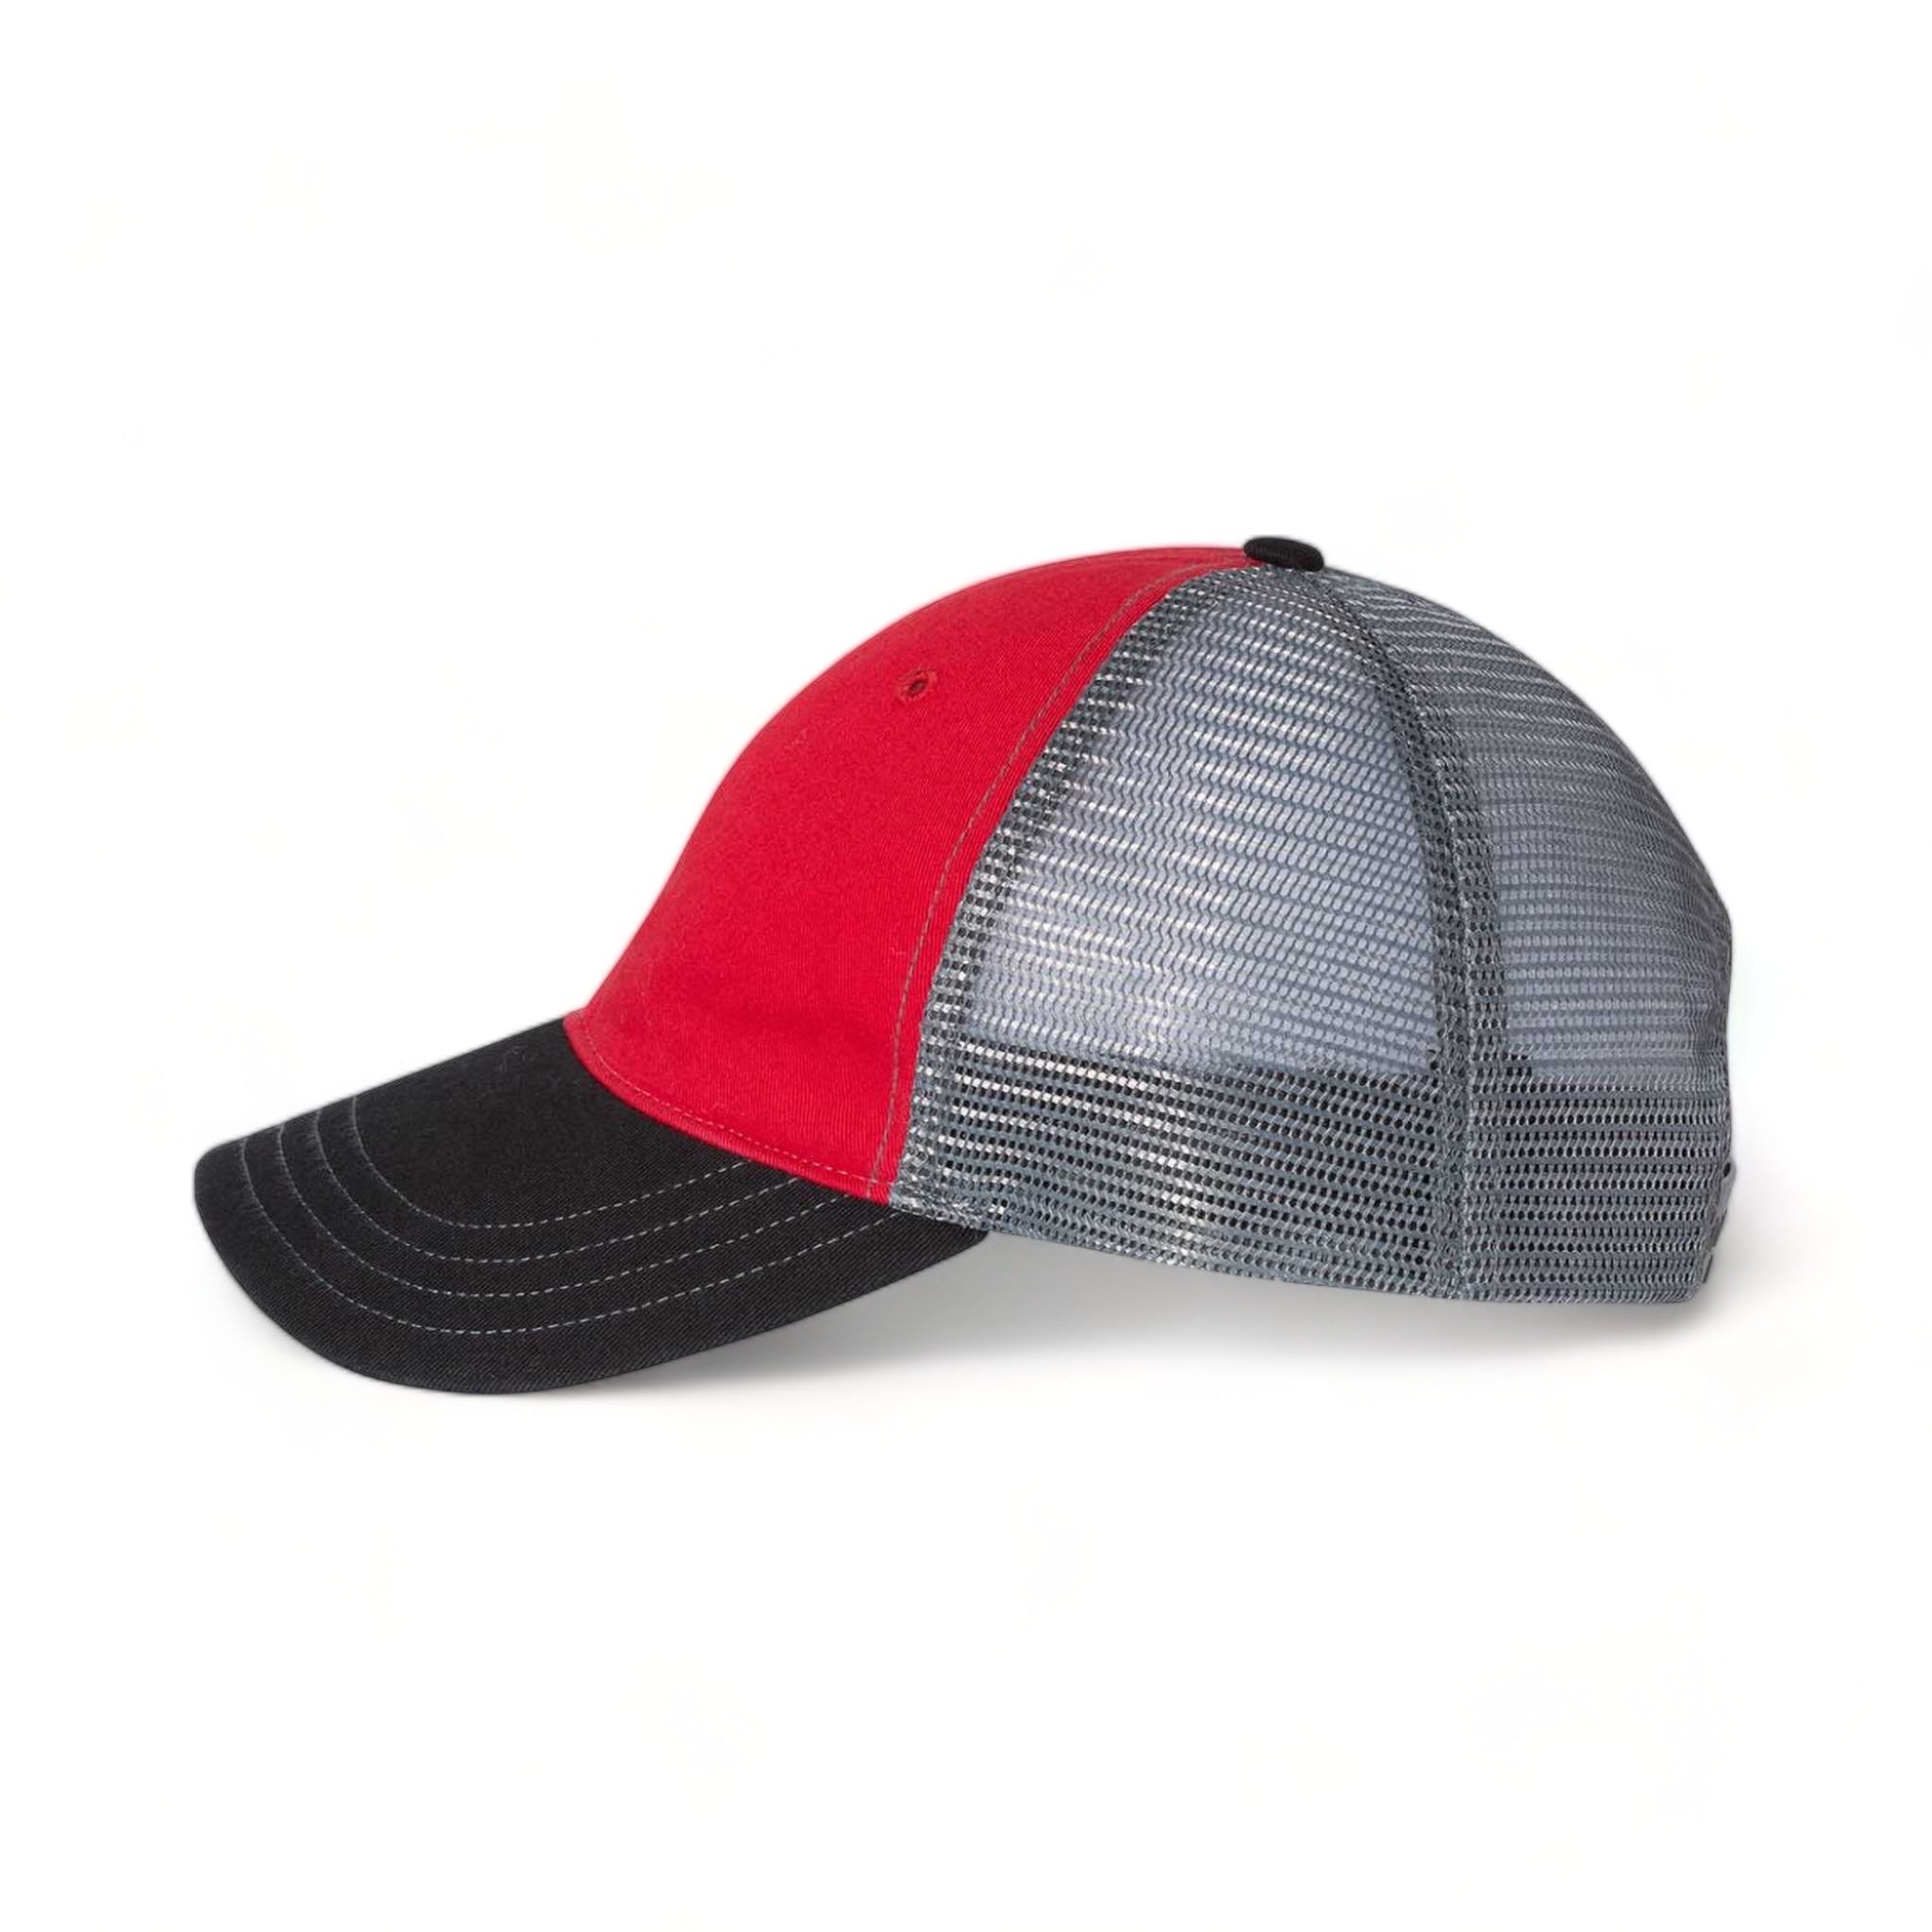 Side view of Richardson 111 custom hat in red, charcoal and black